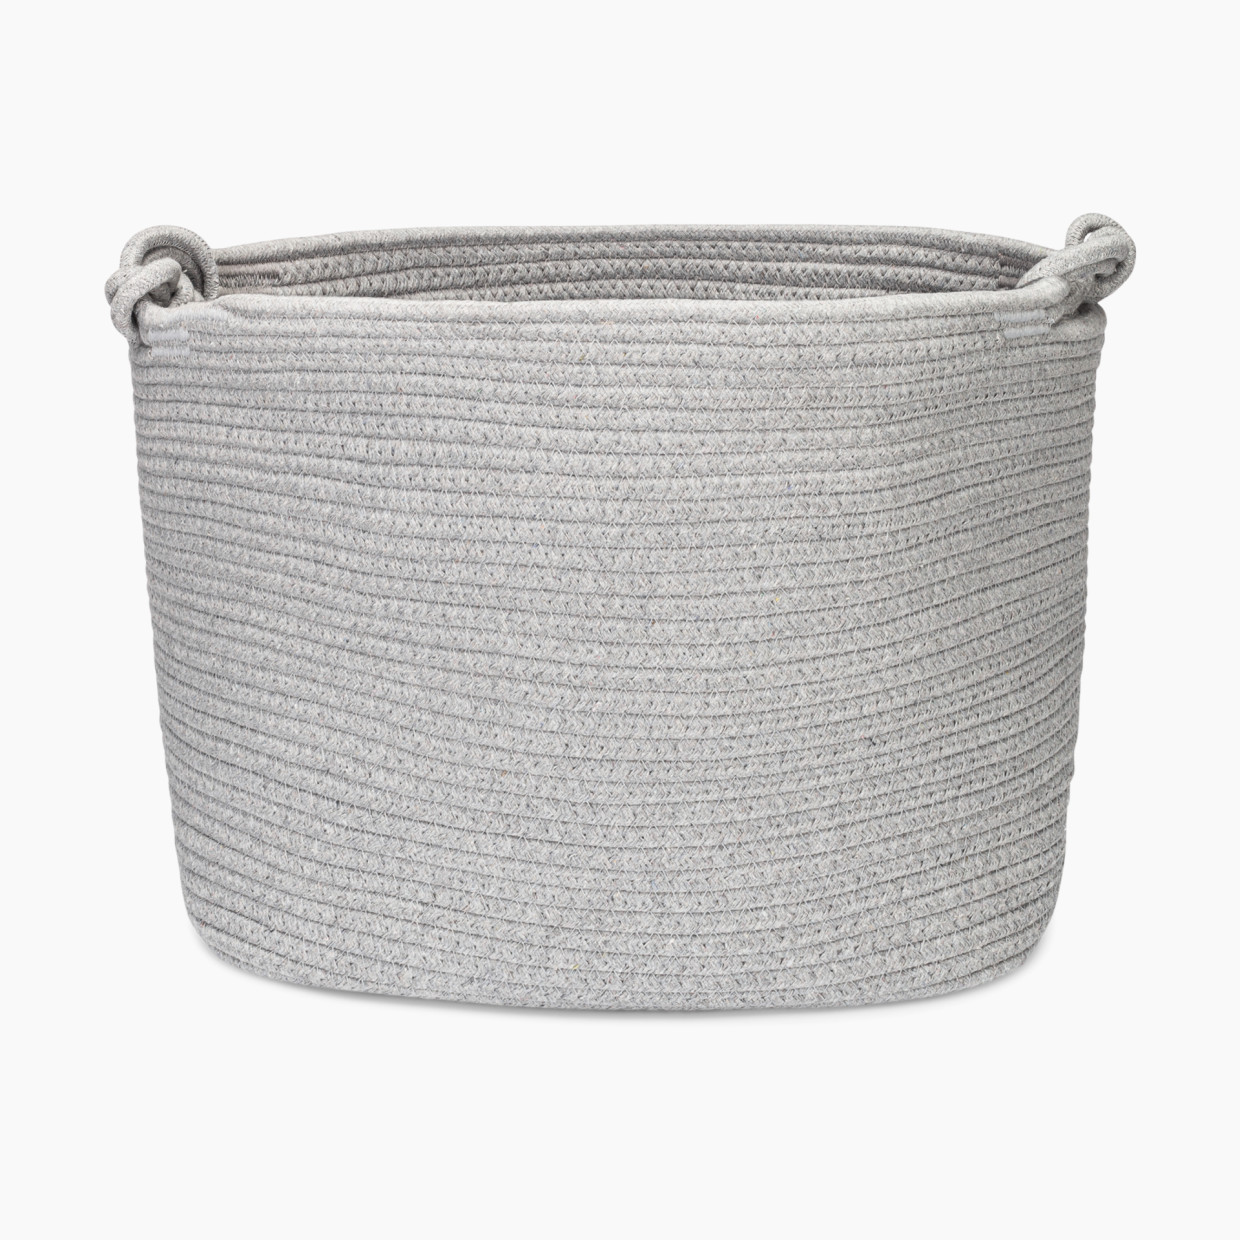 Parker Baby Co. Rope Cube Storage Basket - Gray.